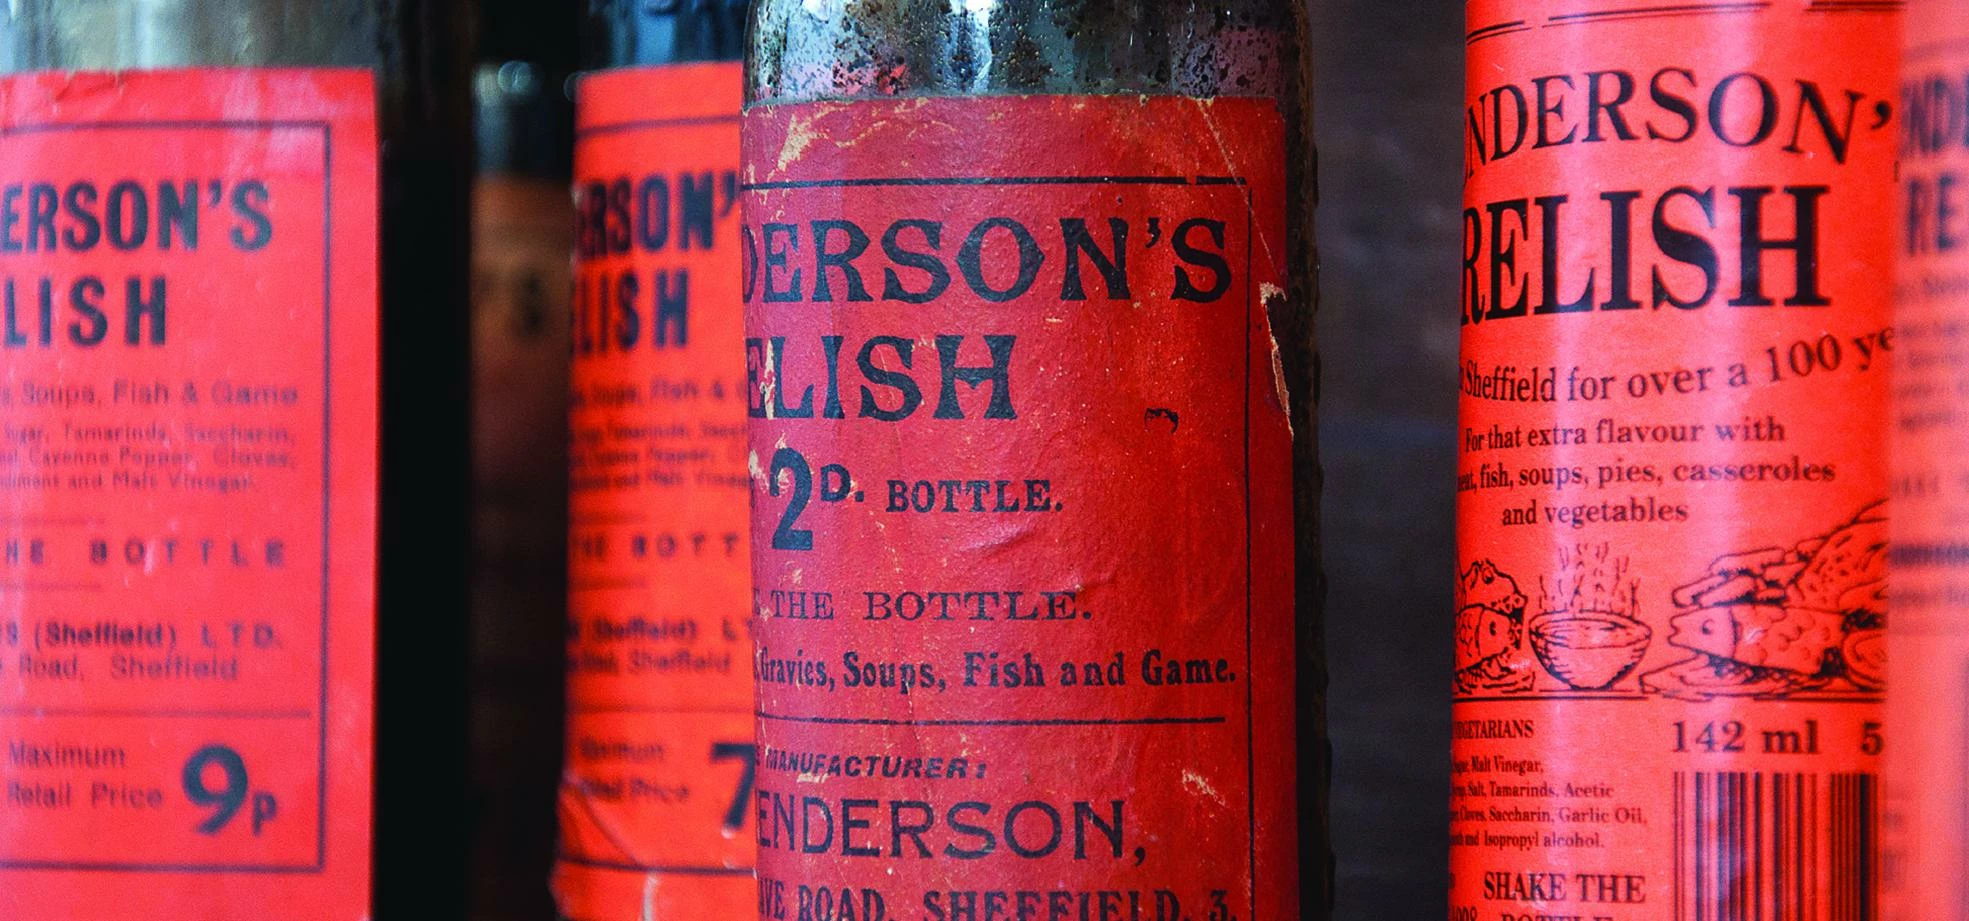 The iconic Henderson's Relish - with old labels